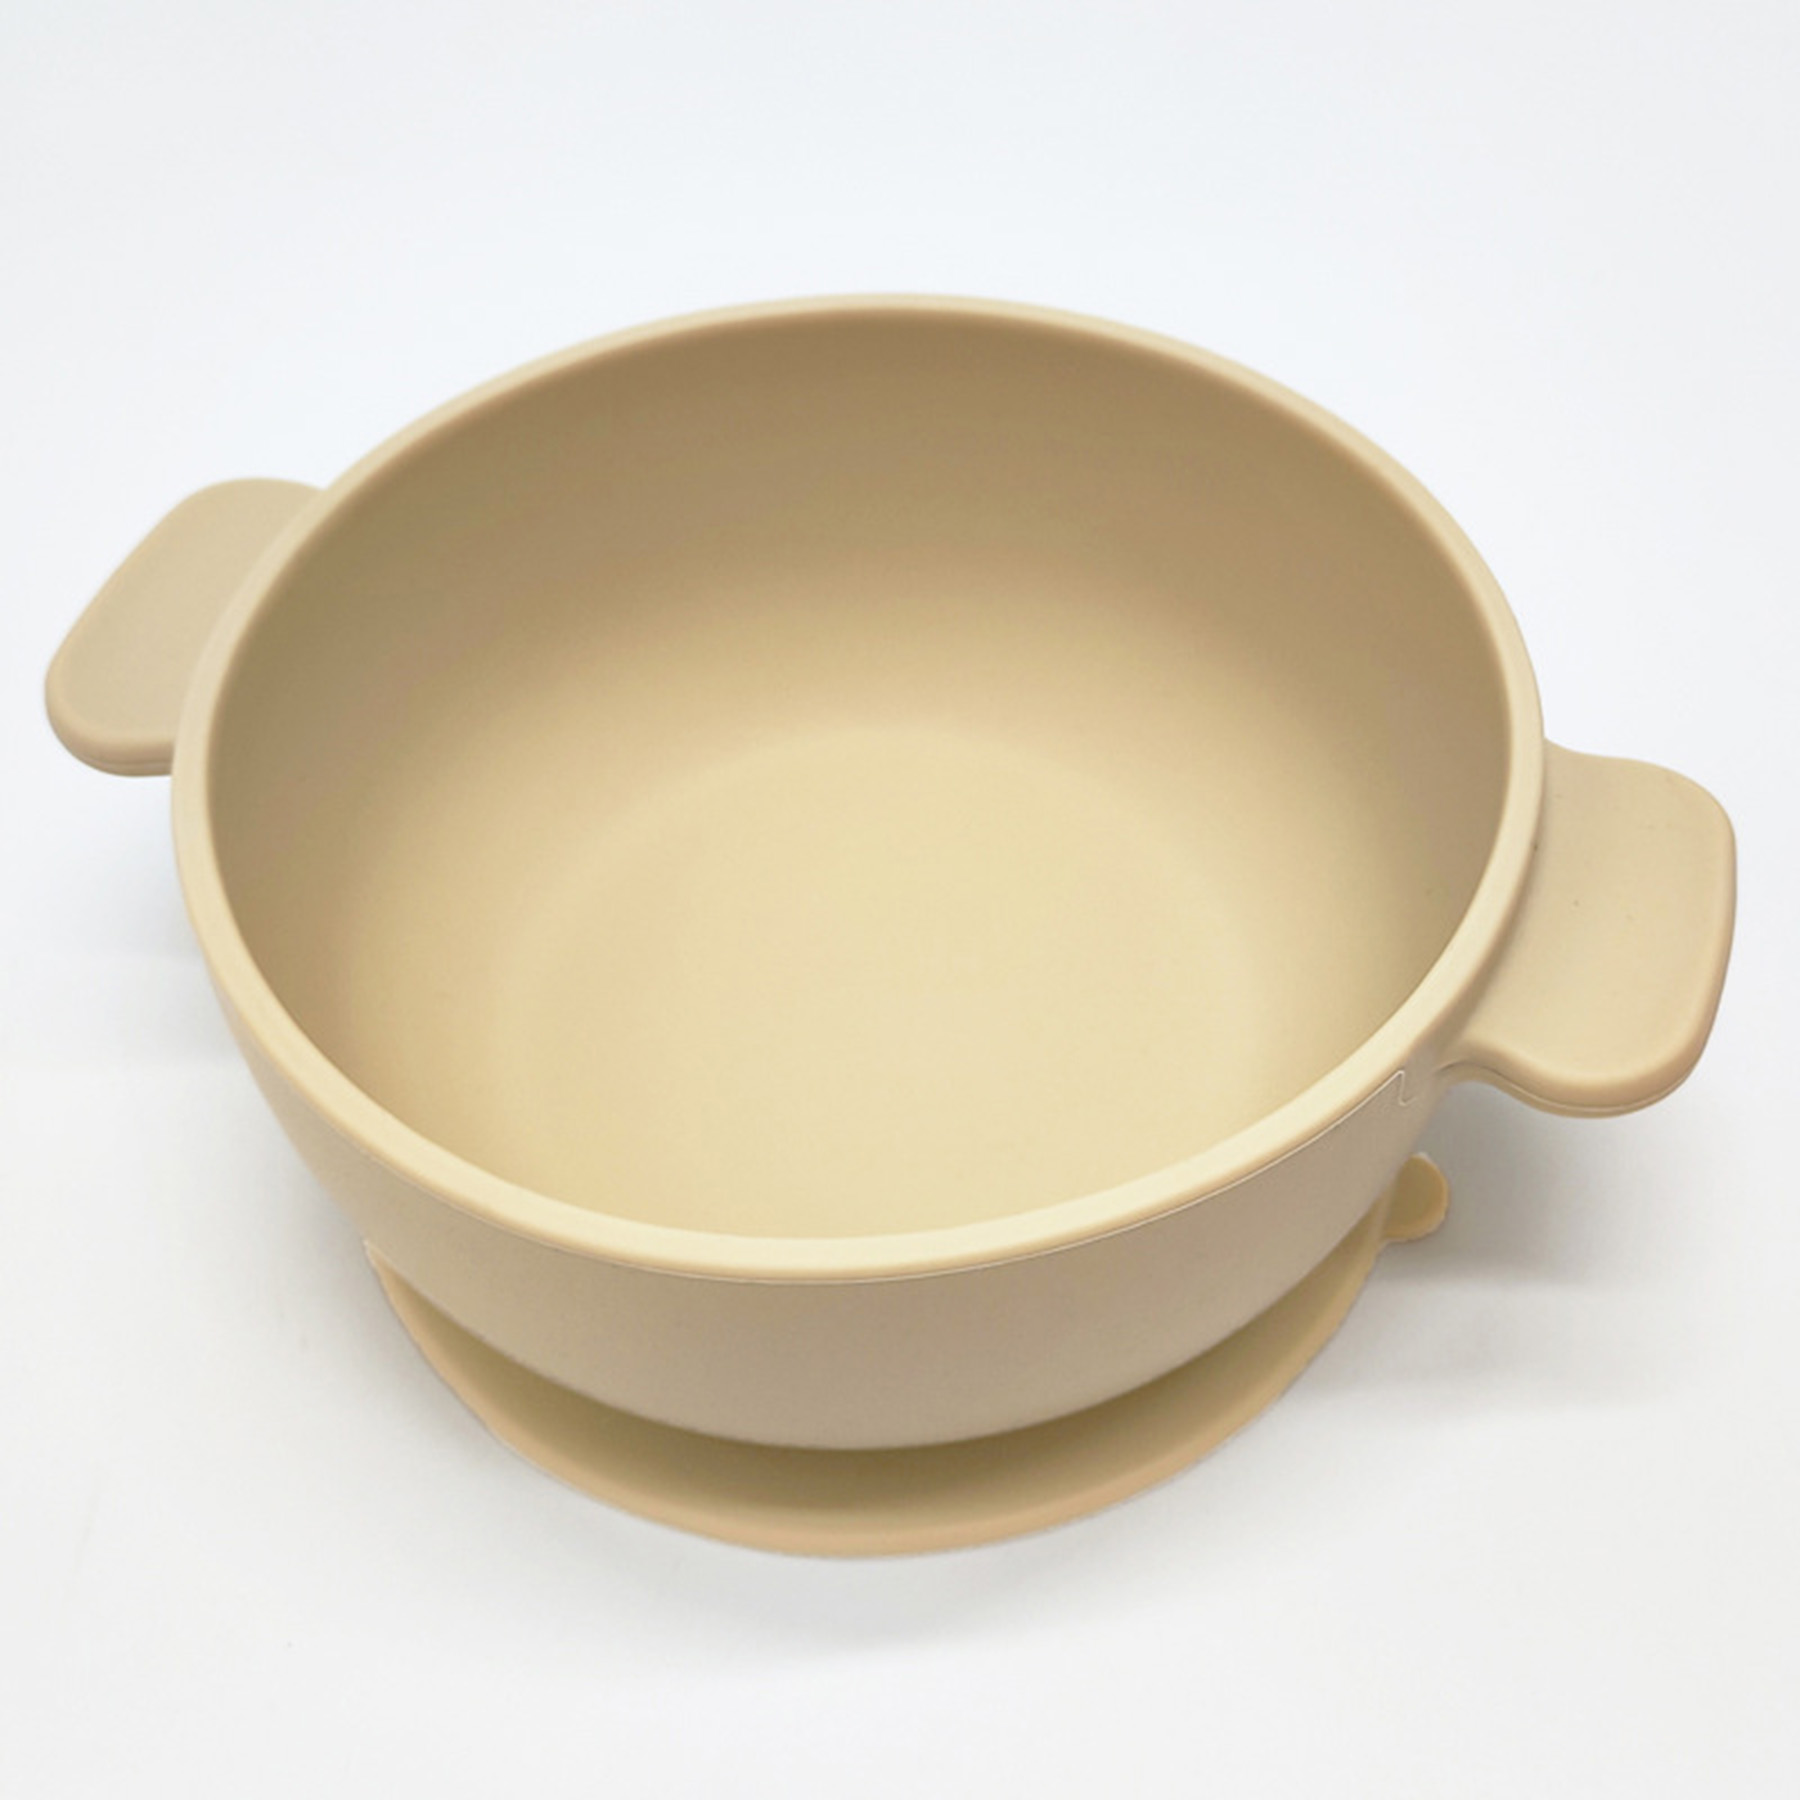 Anti-slip handles Baby Bowls with Suction